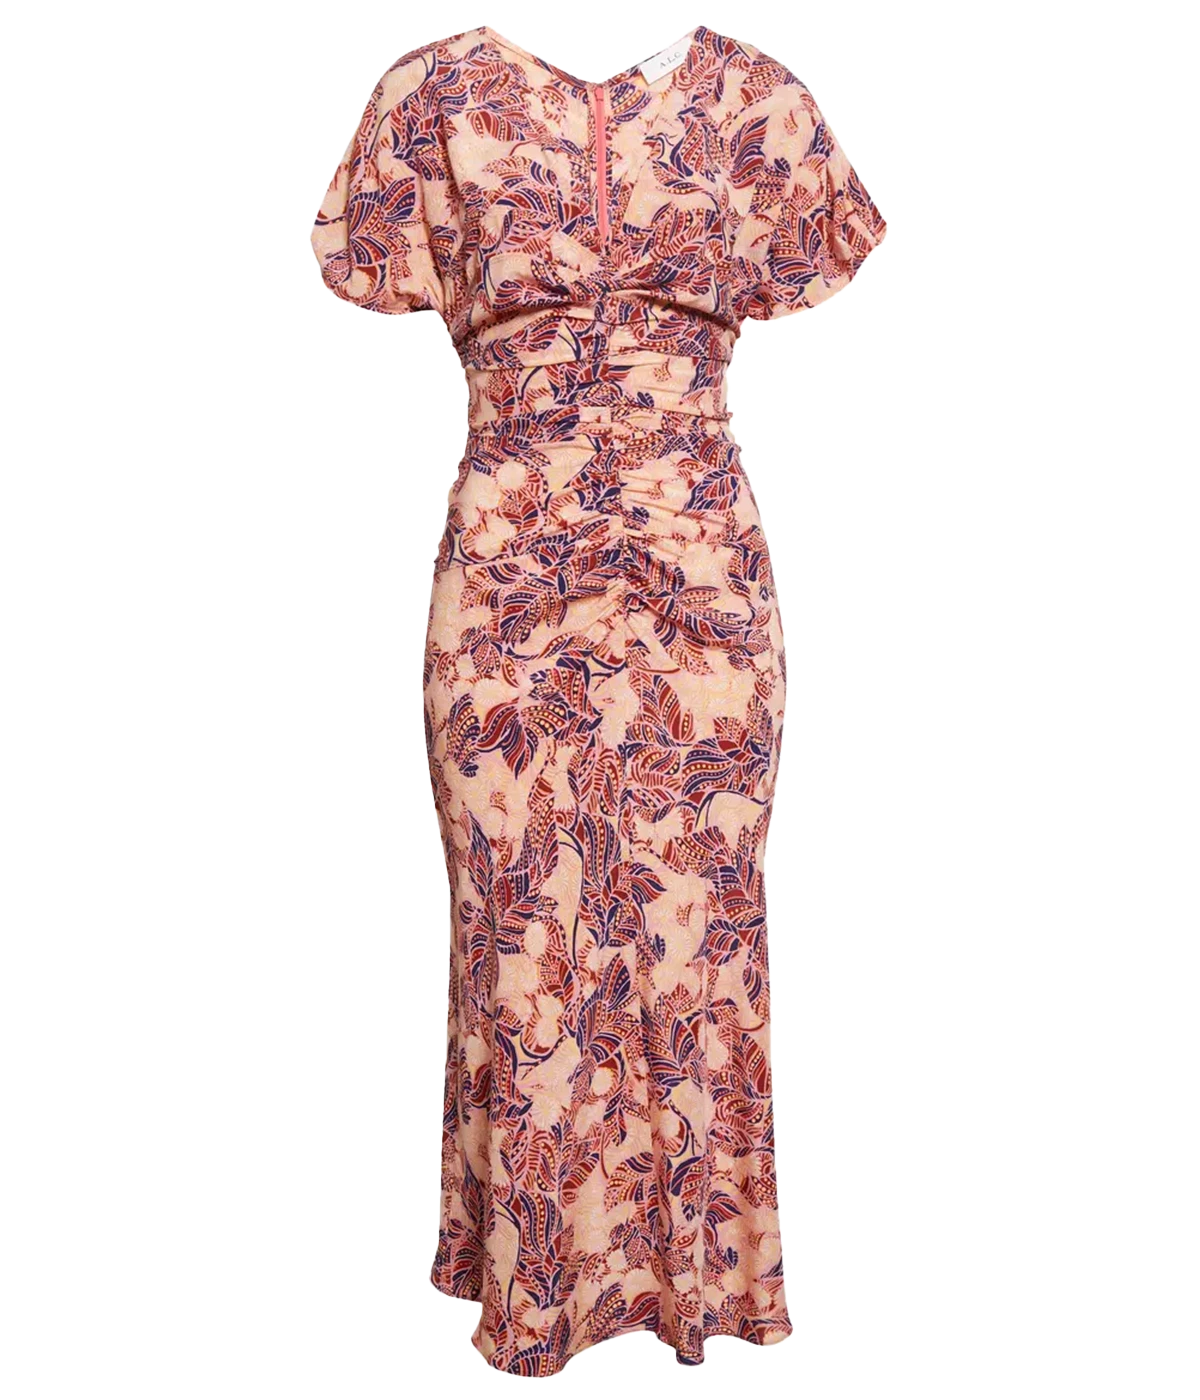 Image of a midi length, short sleeve ruched detail dress, with mod foliage print in pink, orange and blue. Featuring a V Neck line and zip up detail on back. 